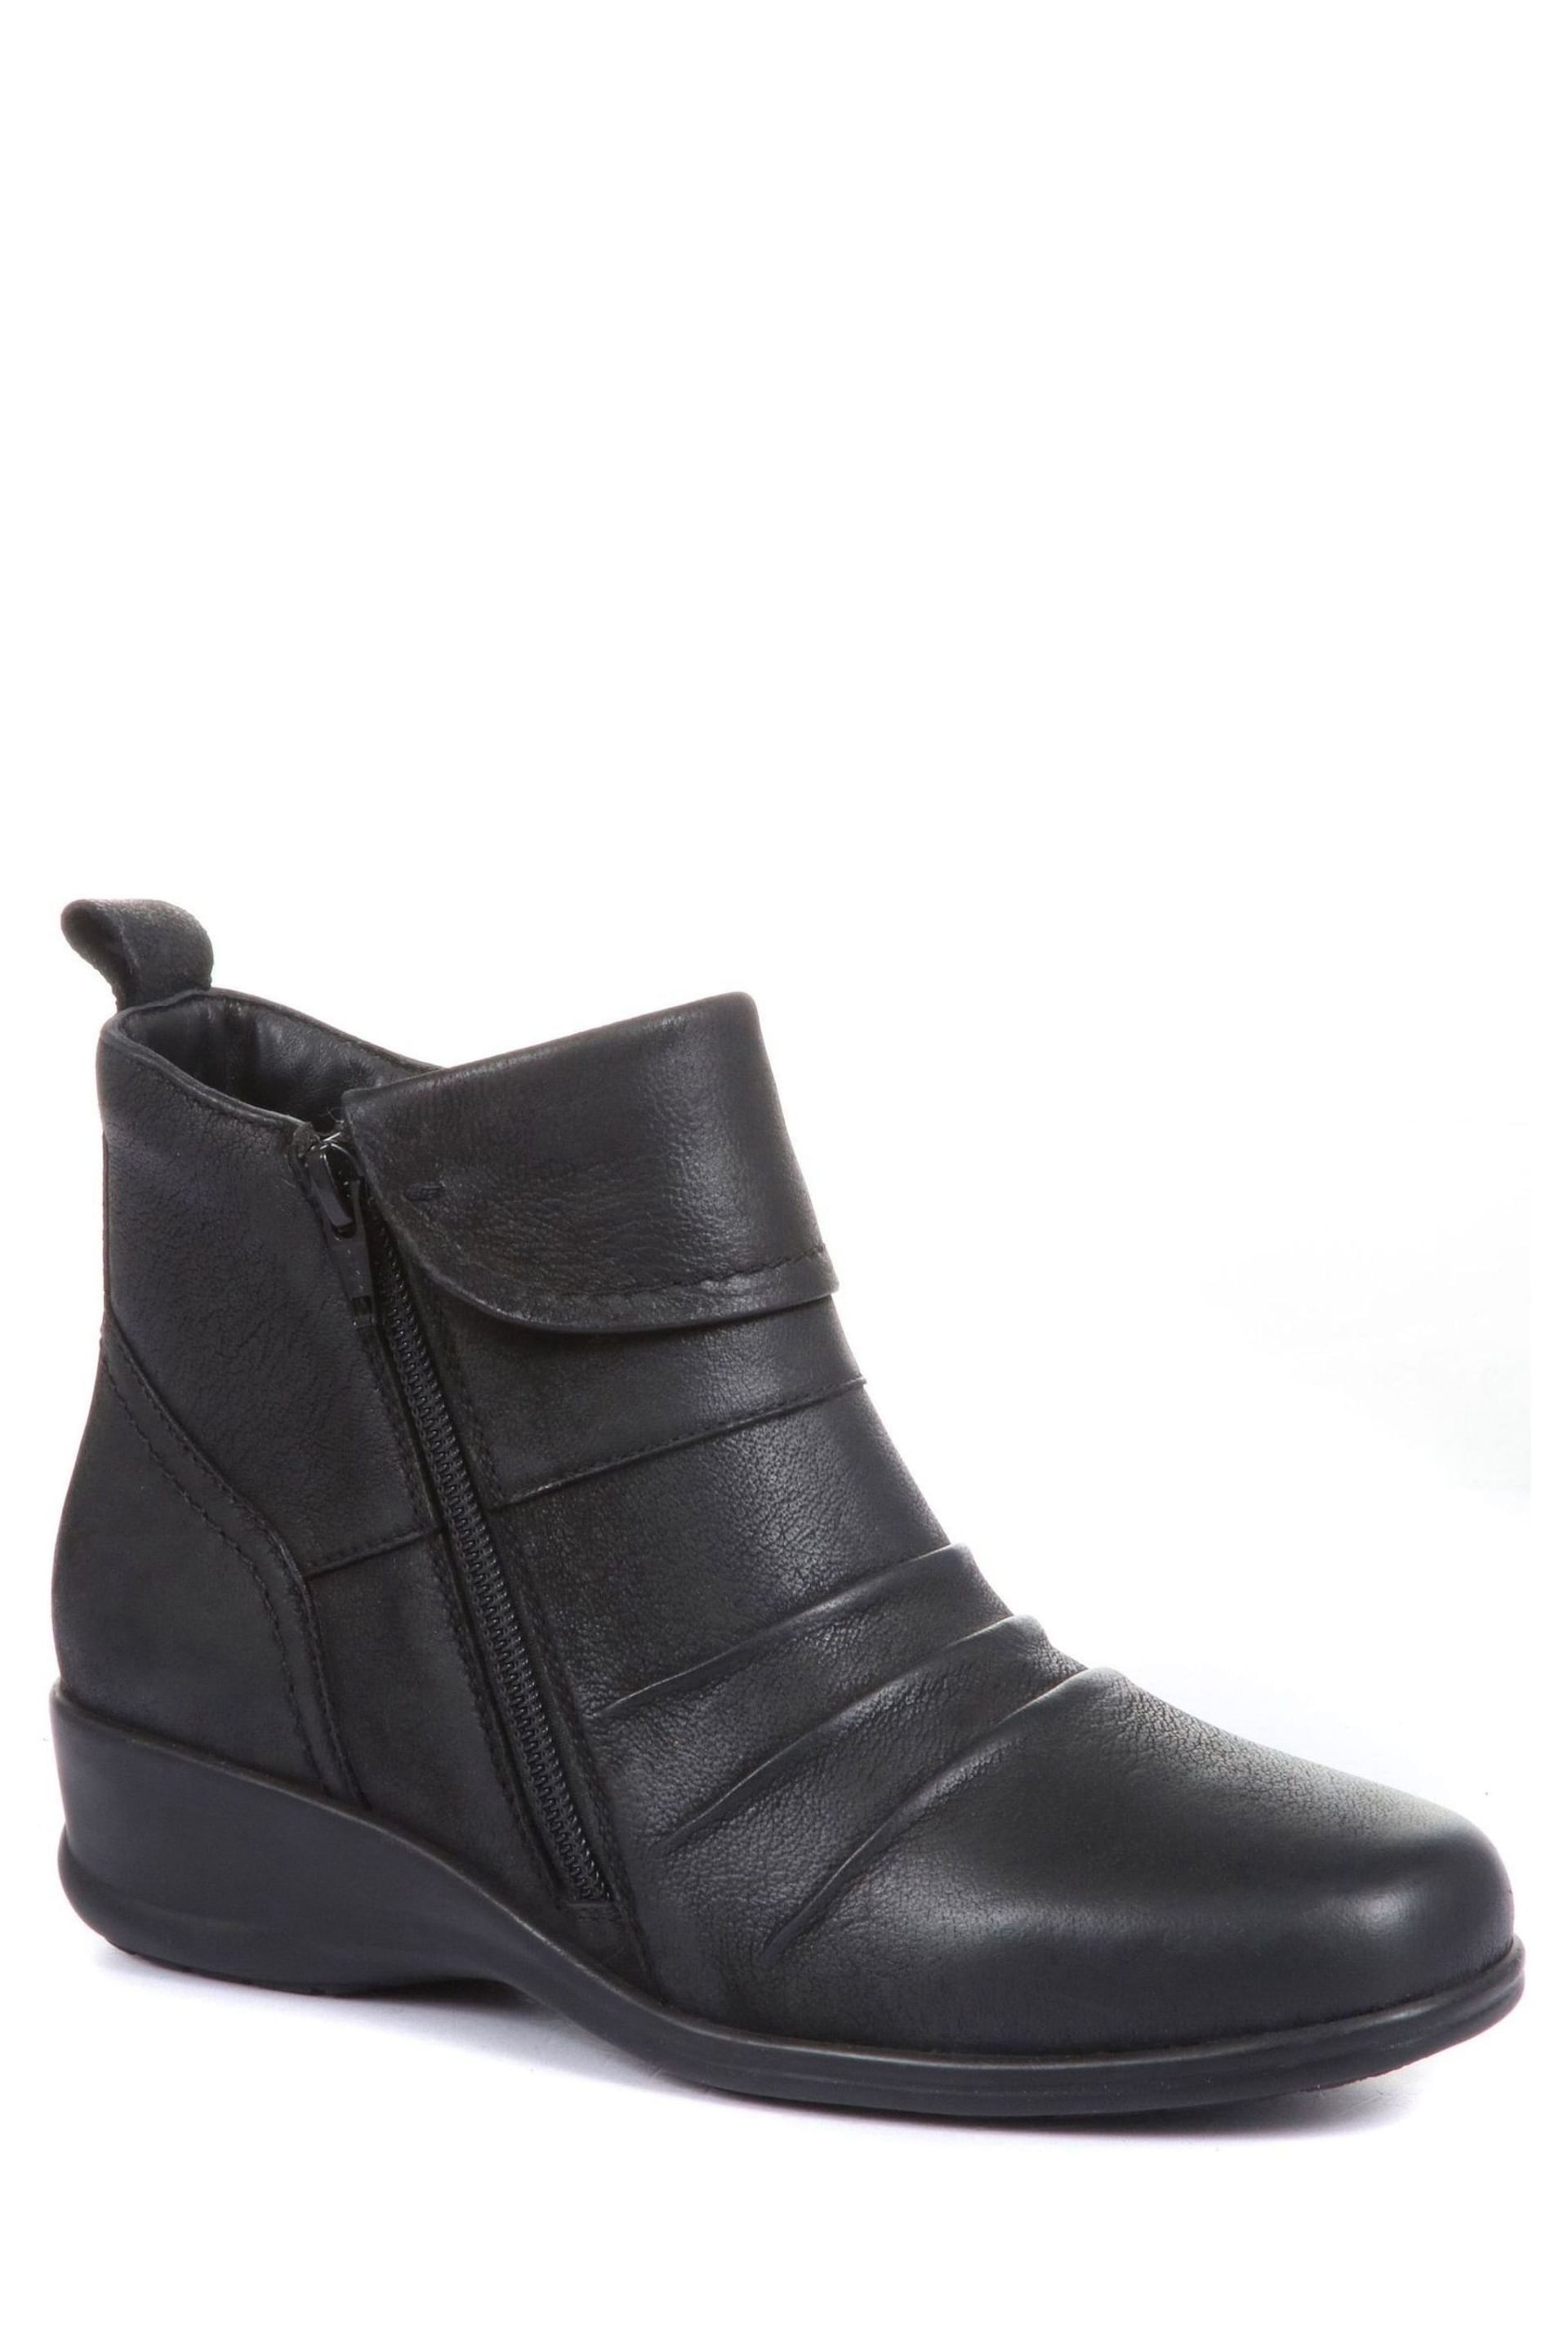 Pavers Black Ladies Dual Zip Leather Ankle Boots - Image 2 of 5